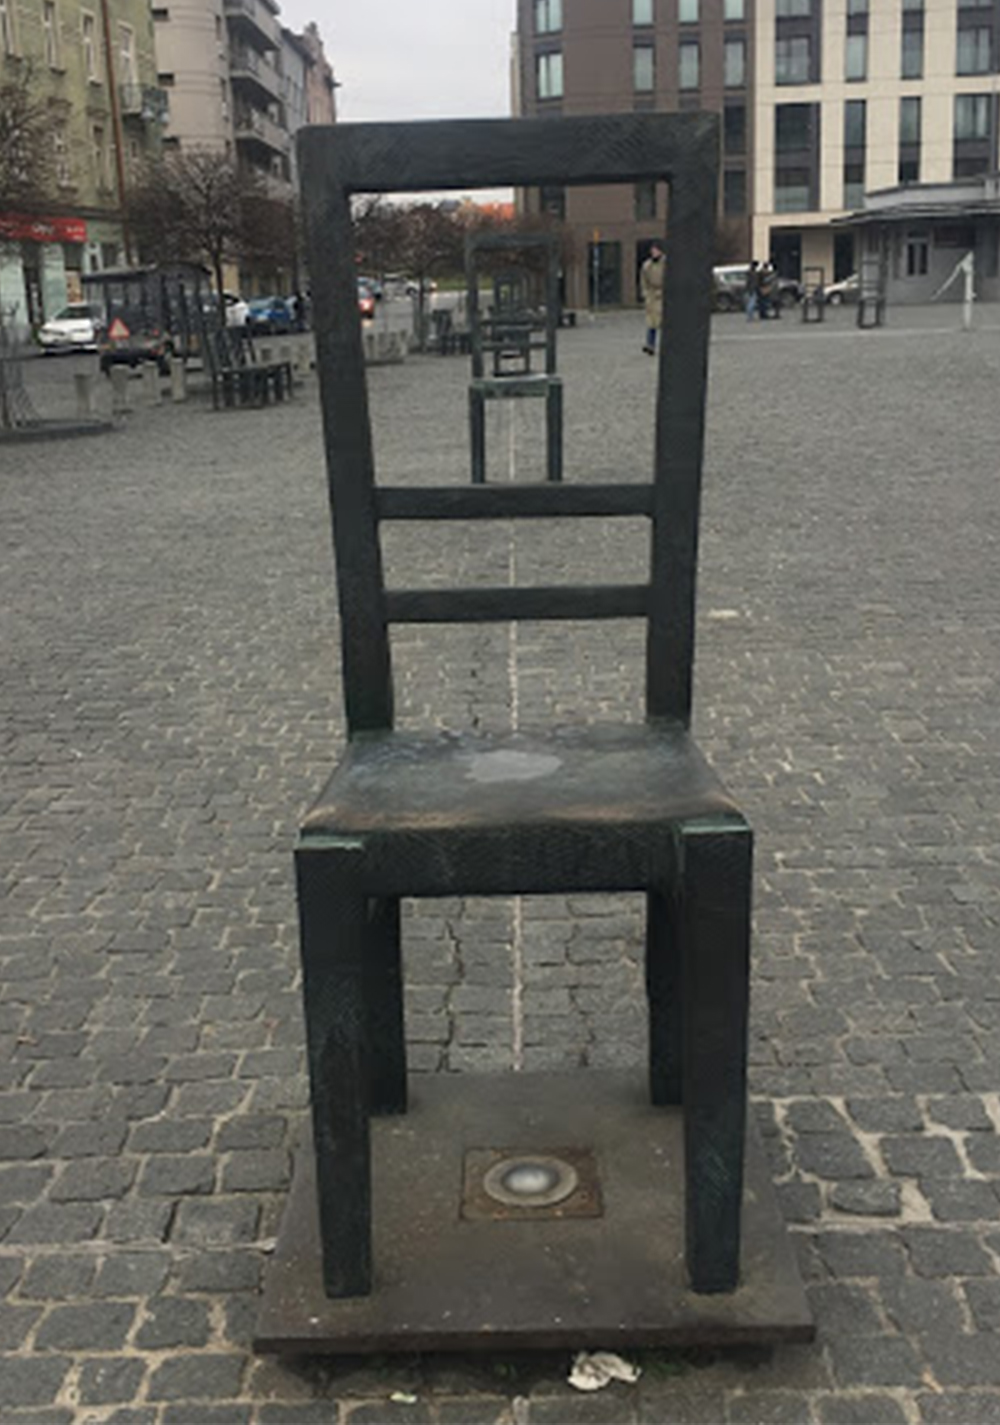 The Ghetto Heroes Square in Krakow